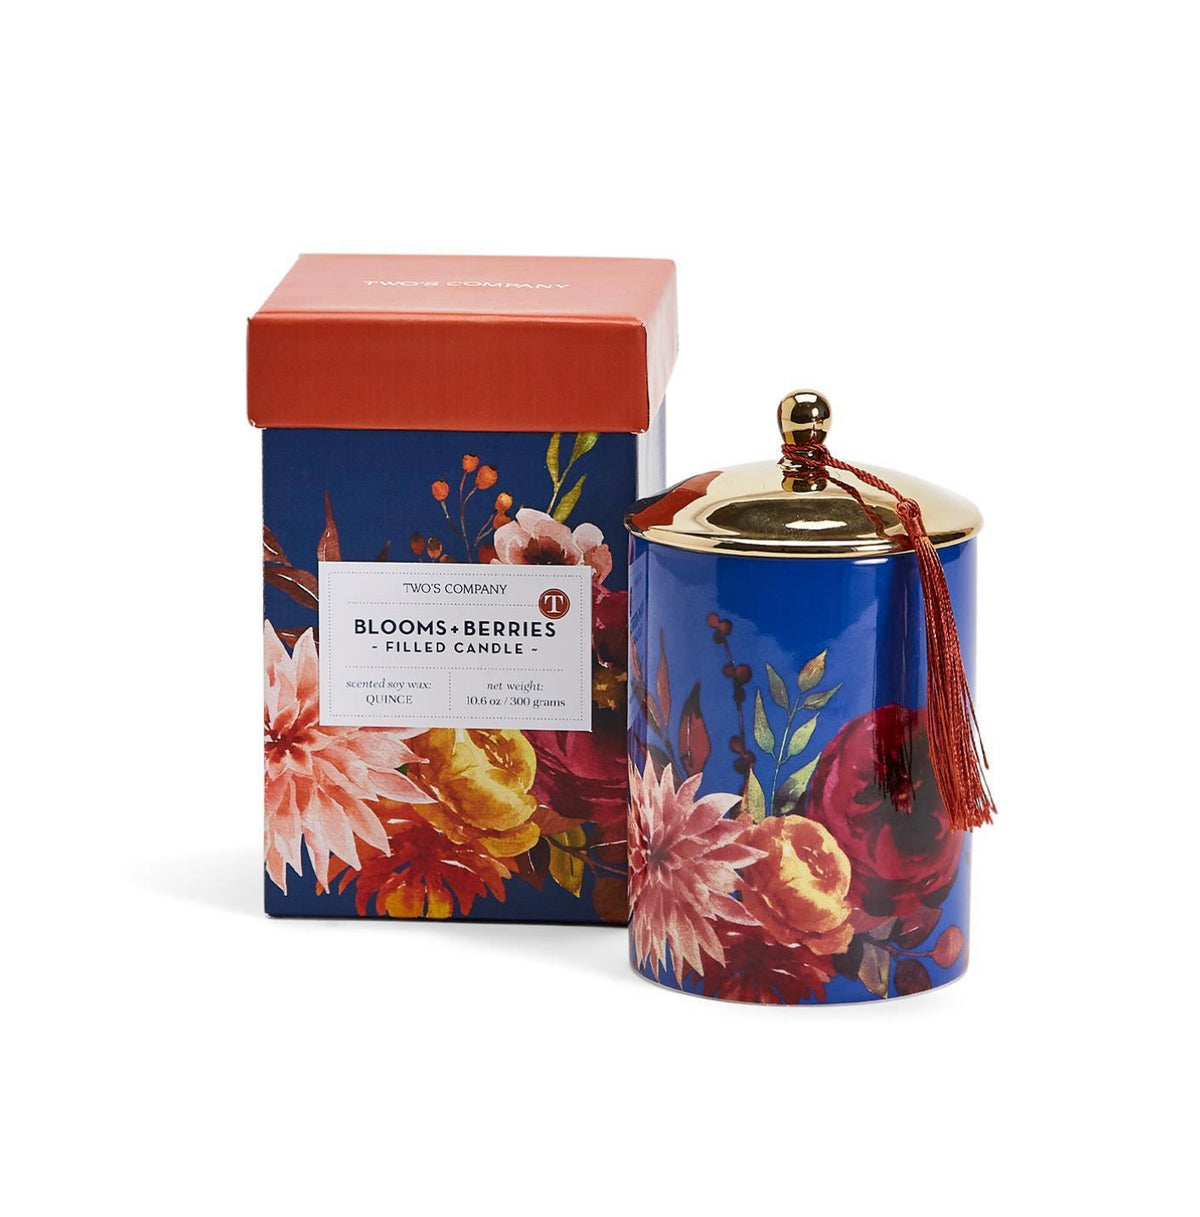 Blooms & Berries Scented Candle in Gb